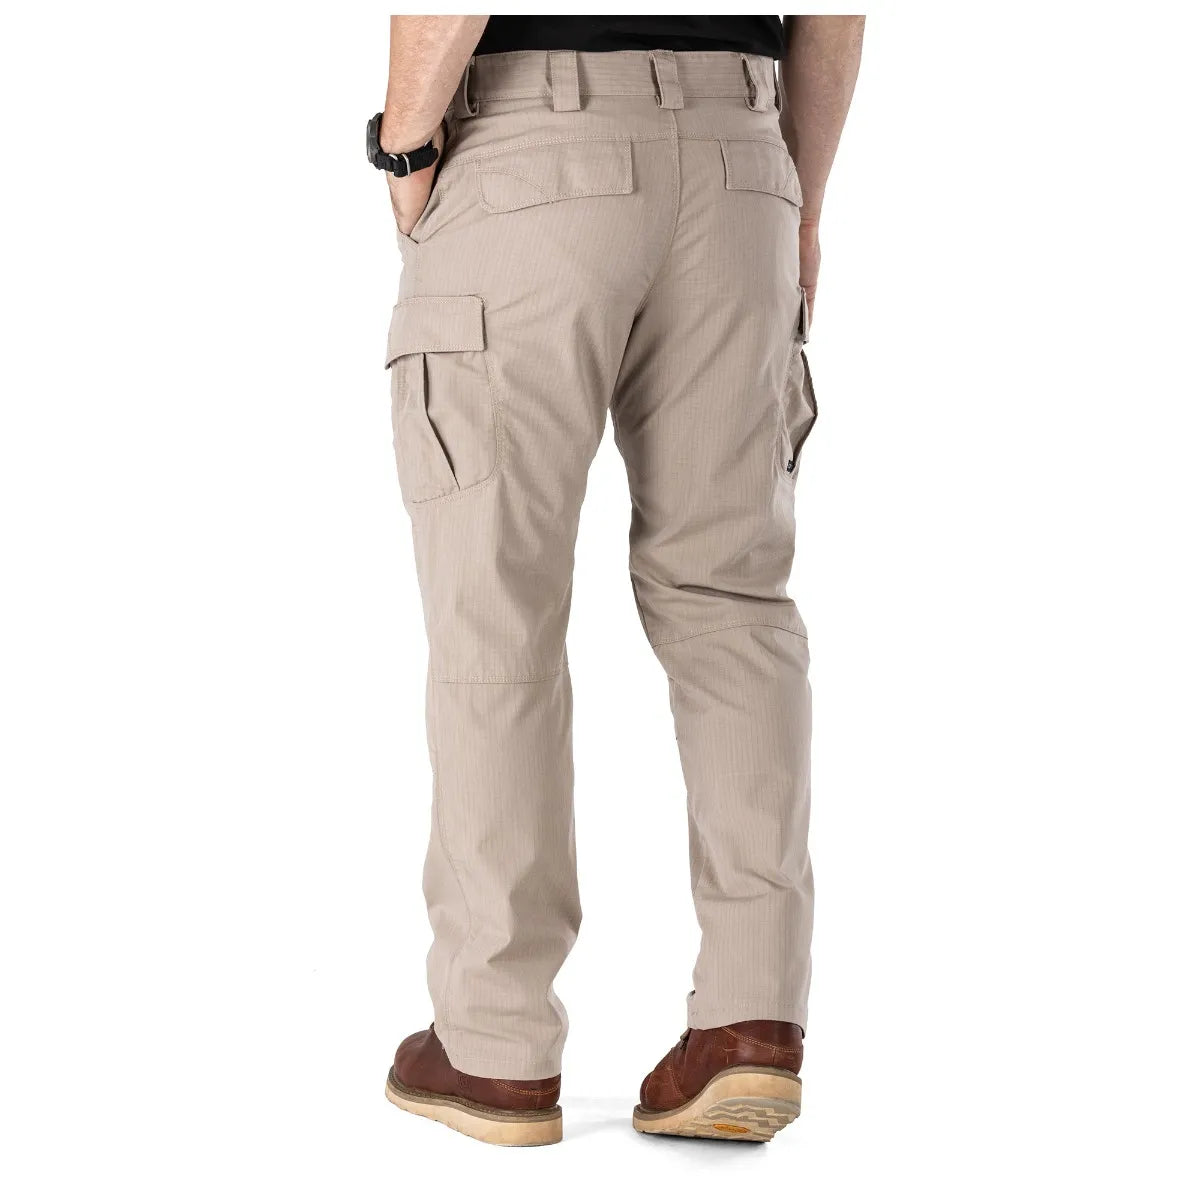 Tactical Gear Storage Pant: 12 strategically placed pockets for ample storage.